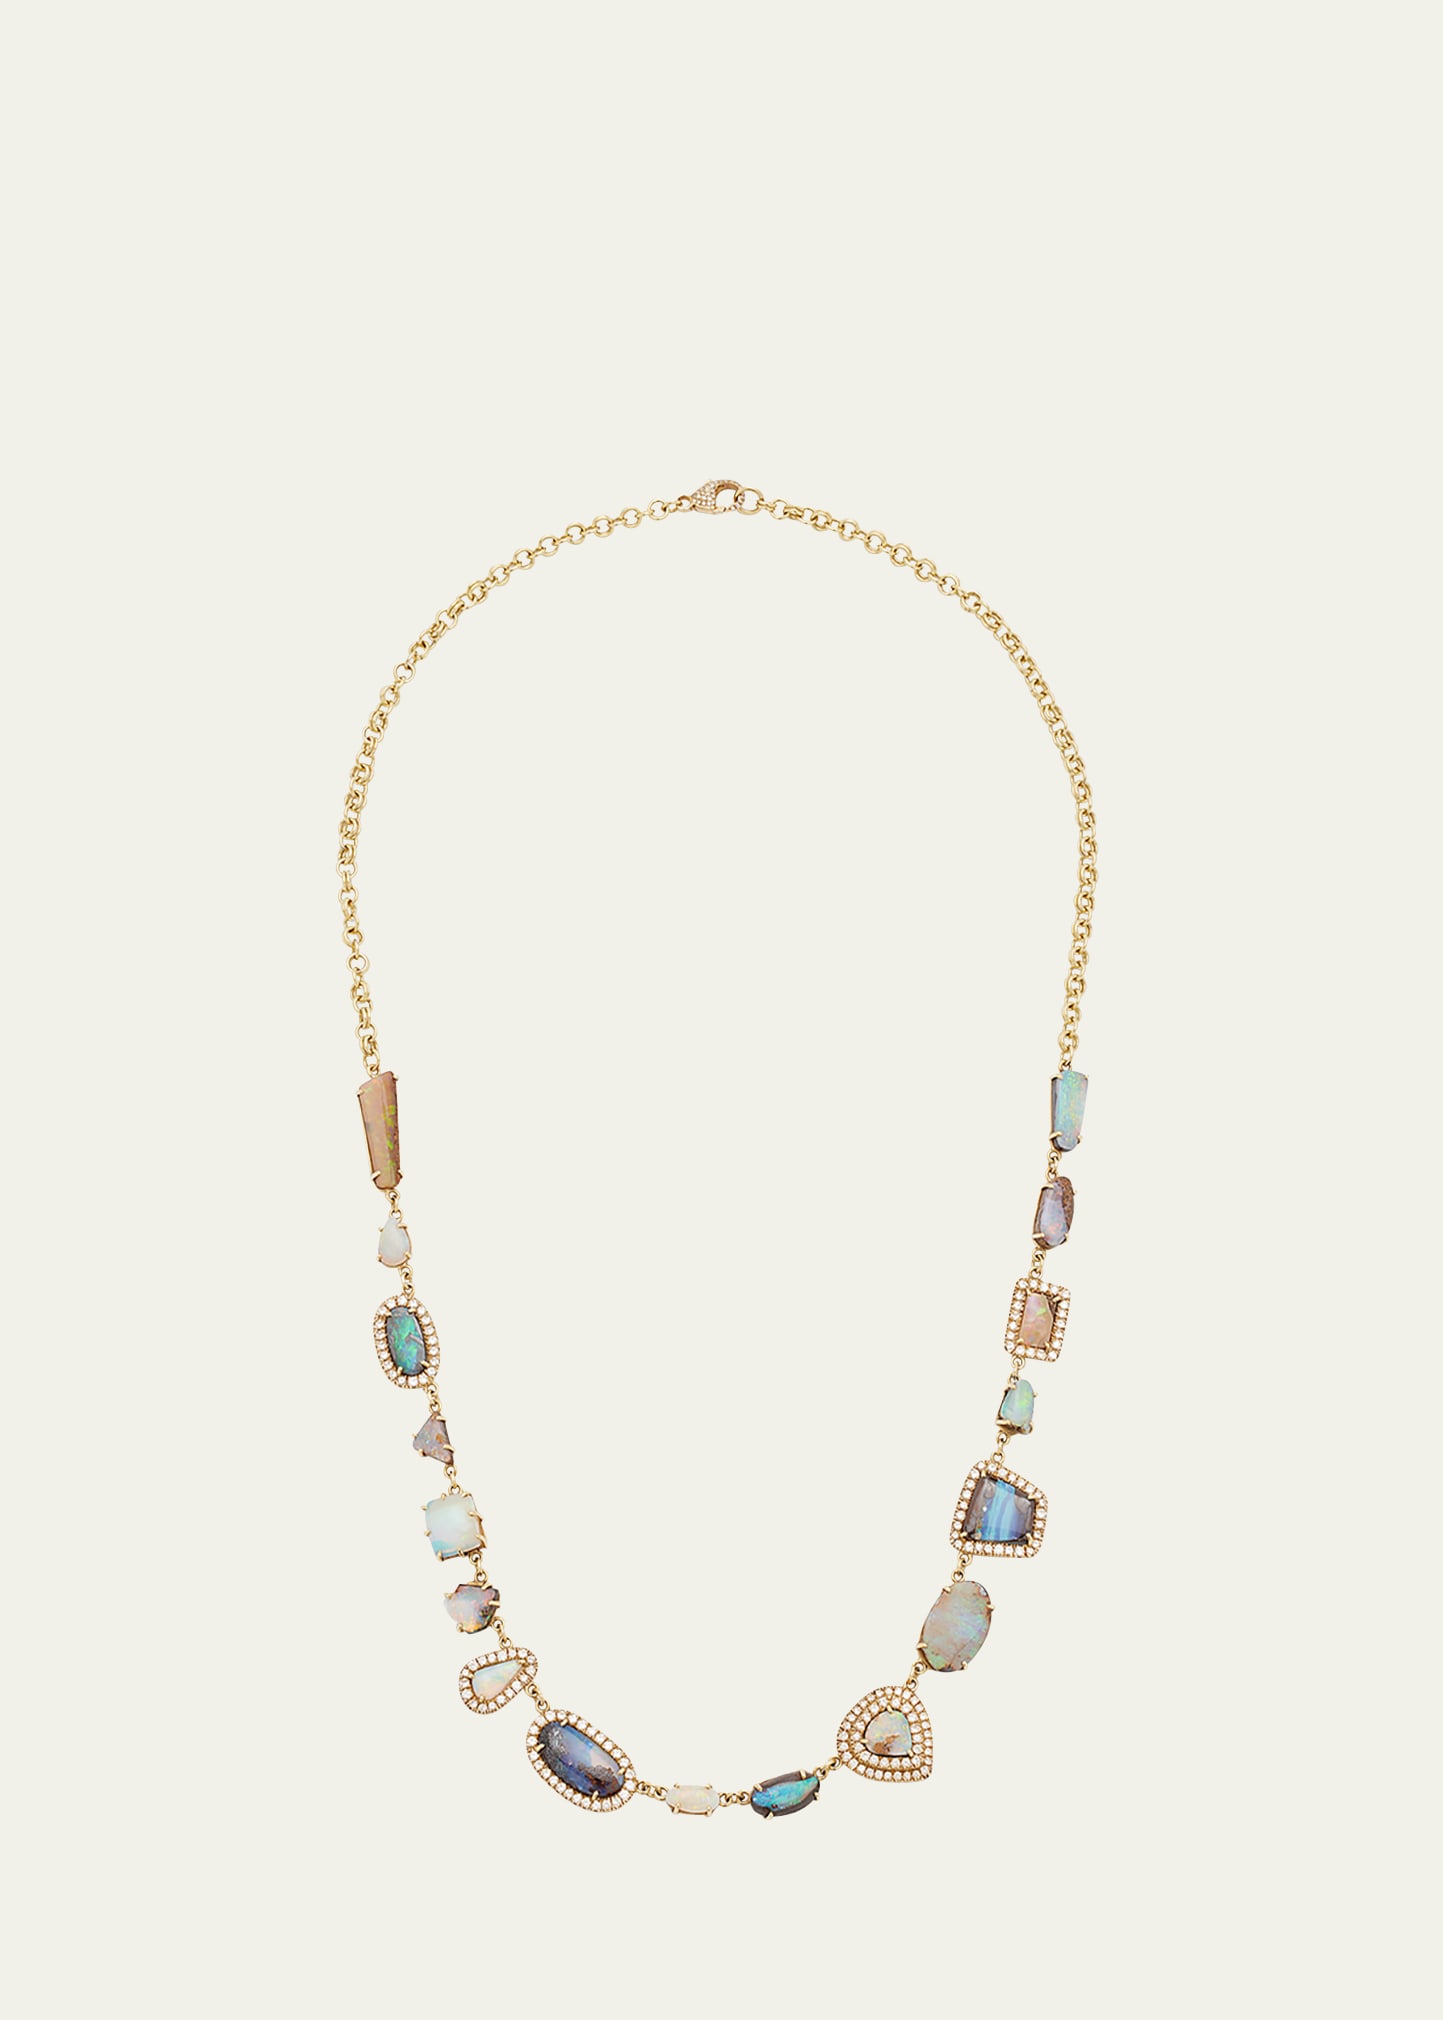 27.08 ct. Boulder Opals Necklace With 1.79 ct. Diamond, Double Diamond Bezels And Clasp In 18K Yellow Gold (21")